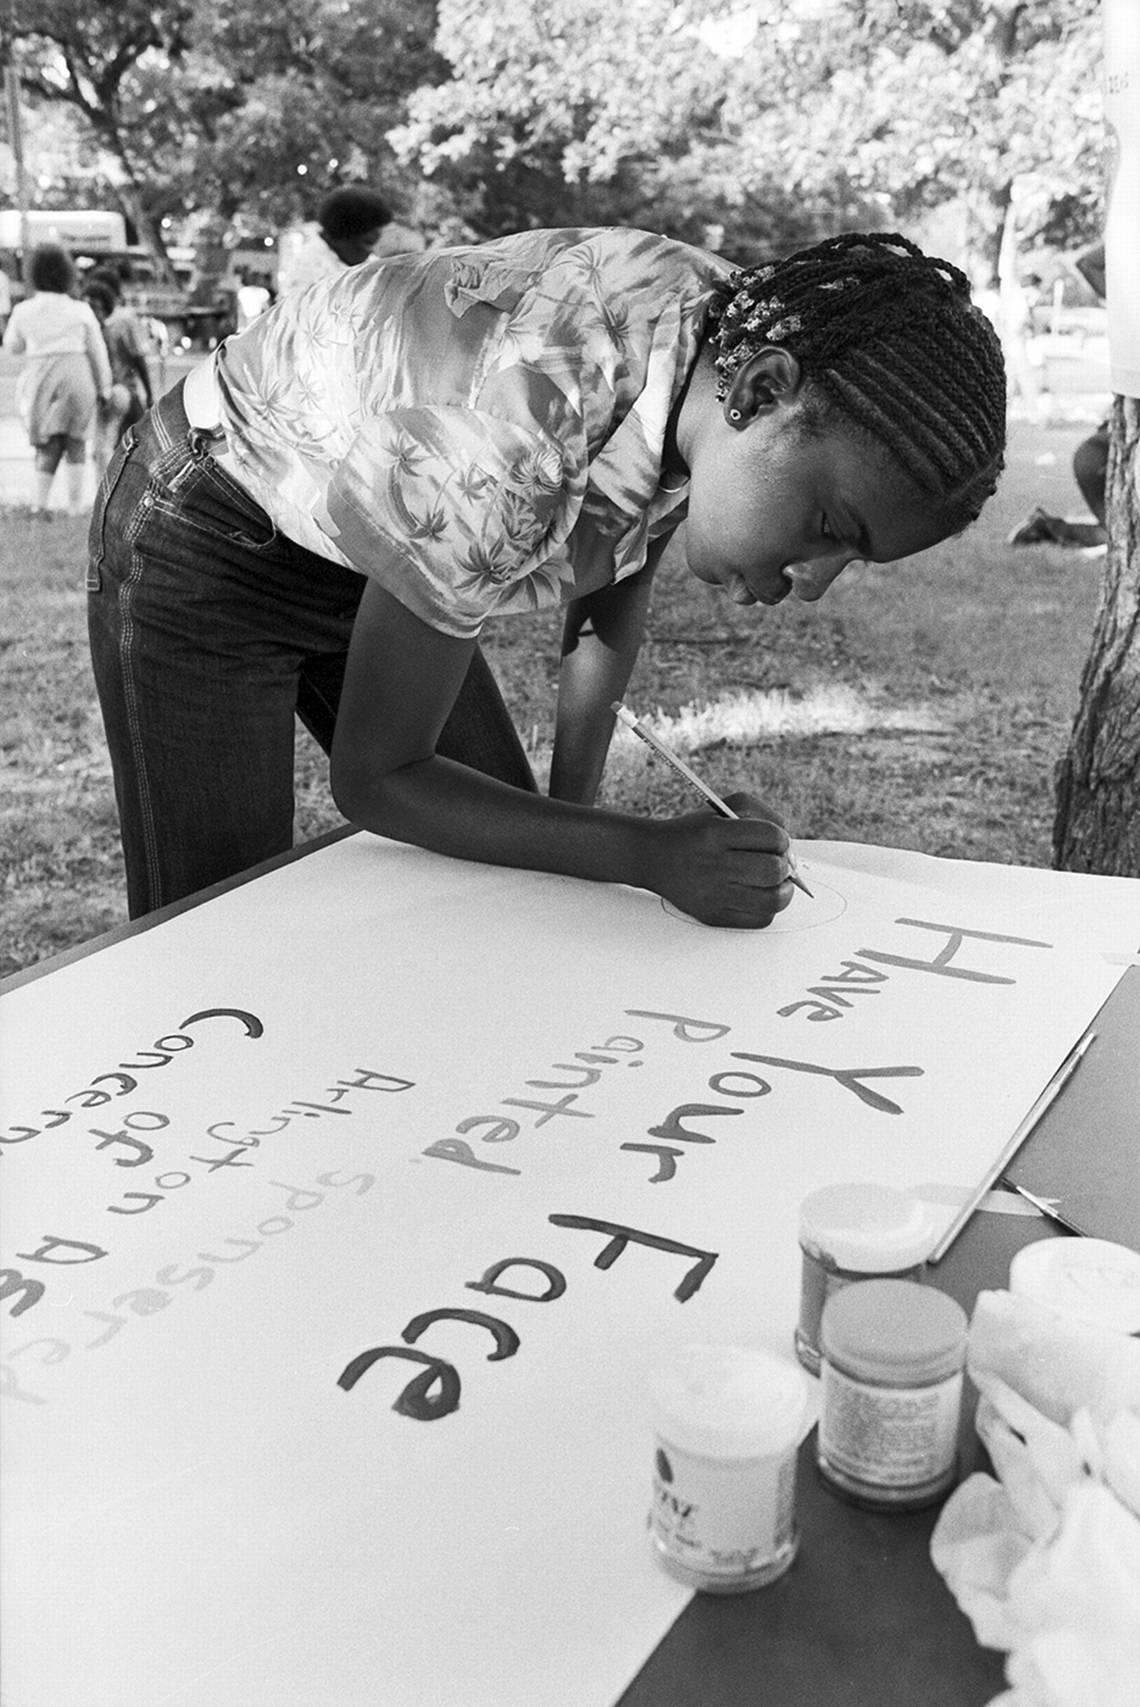 A young girl prepares a sign for a face painting station for the Juneteenth festivities in Sycamore Park in Fort Worth in 1981.